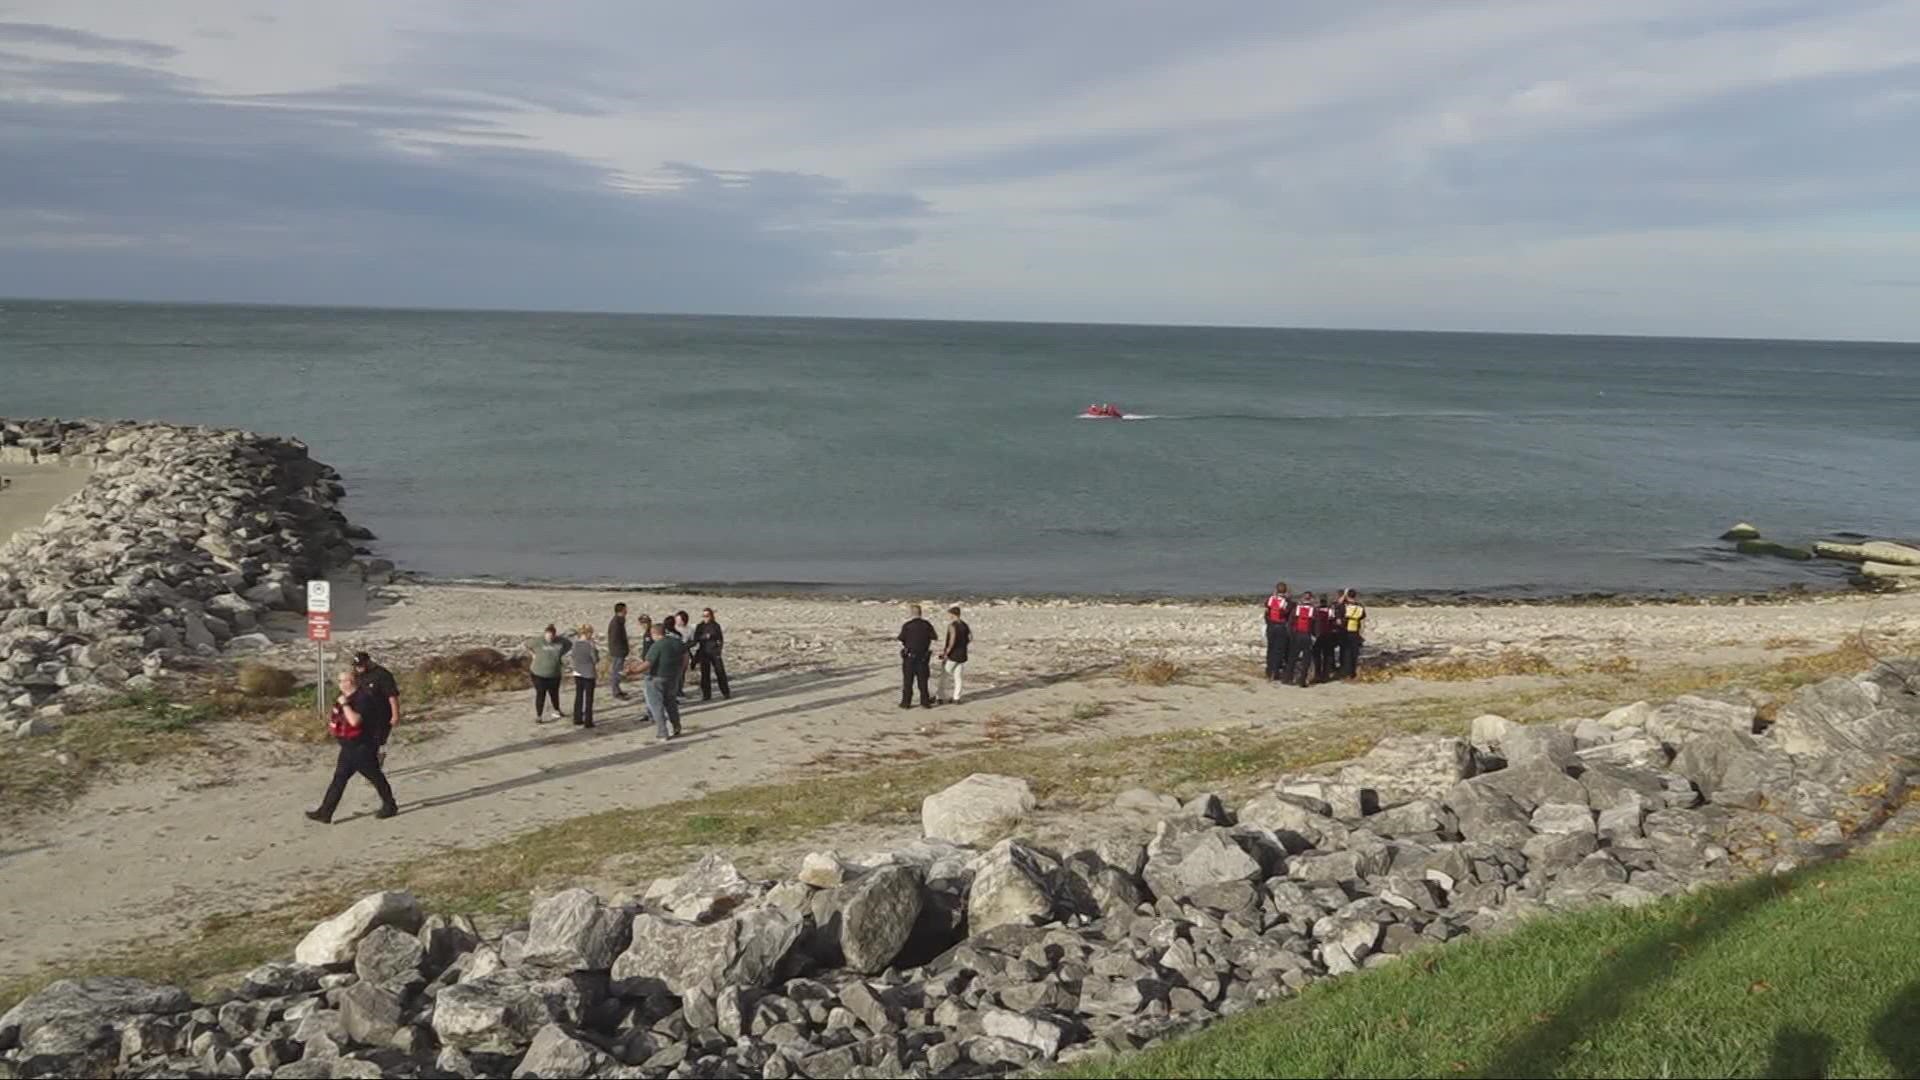 The Coast Guard confirmed to 3News that the search for a man who went missing kayaking in Lake Erie is now a recover mission.